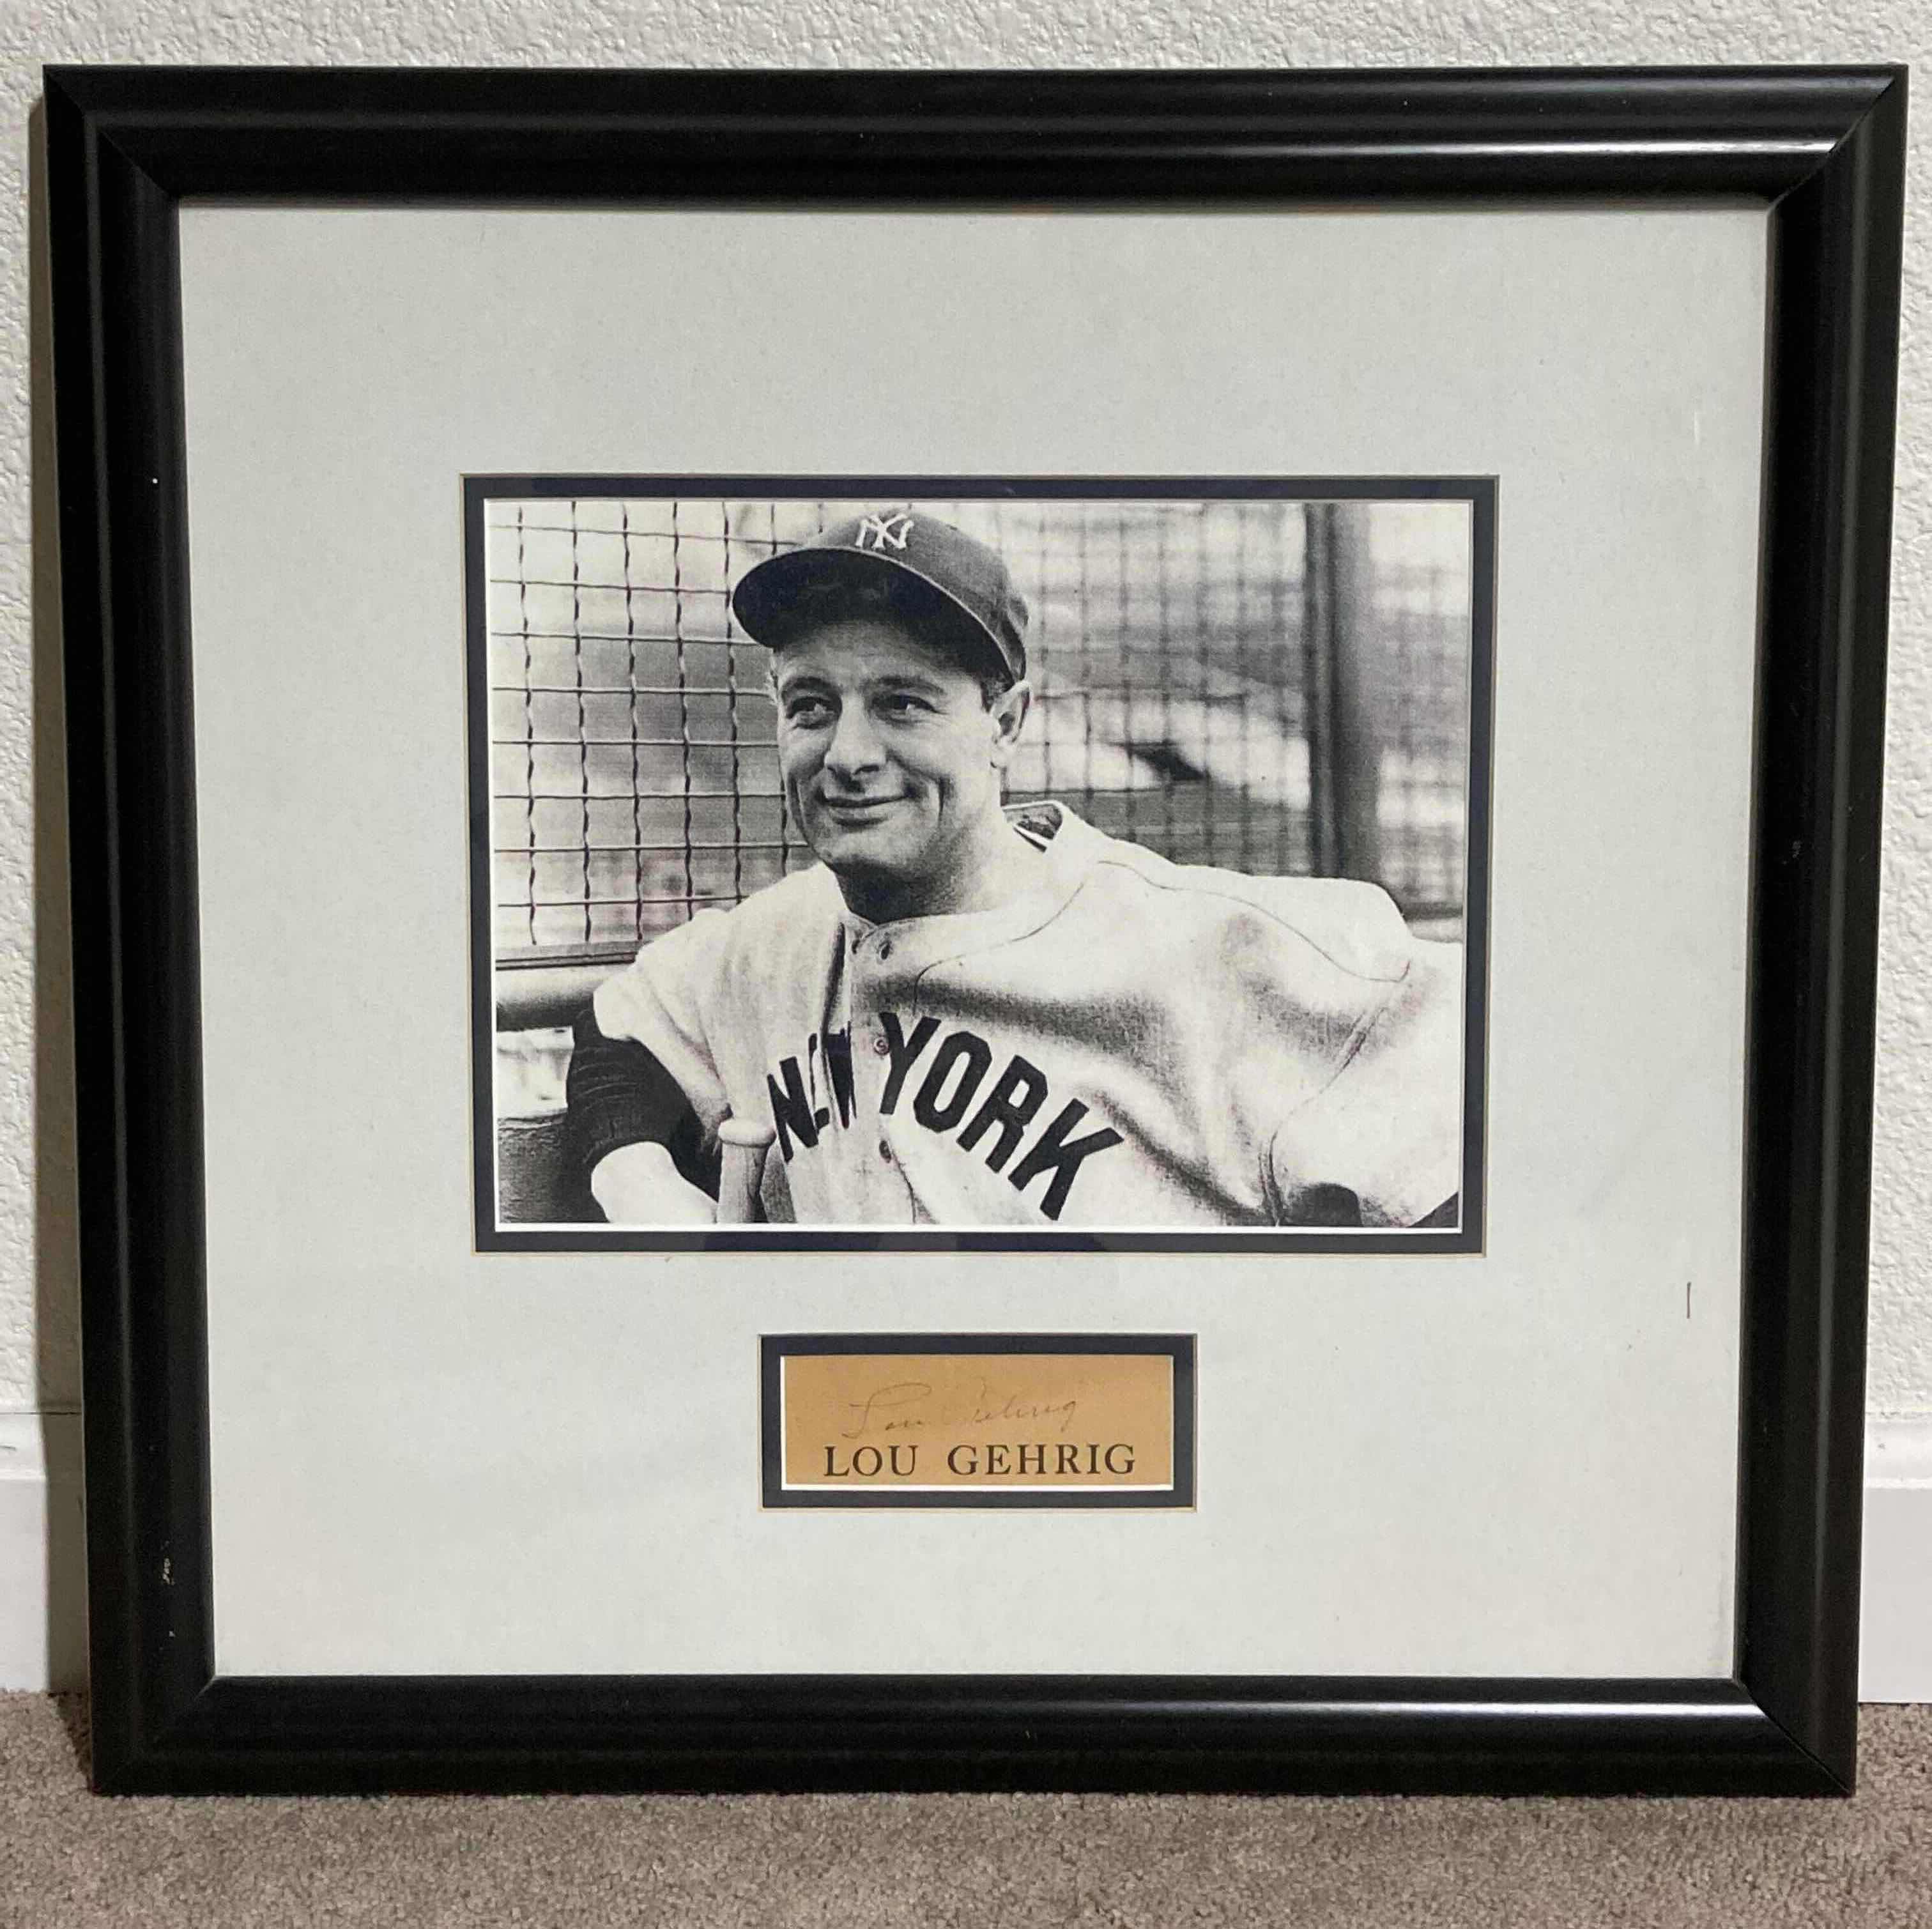 Photo 1 of LOU GEHRIG YANKEES FRAMED PHOTOGRAPH AUTOGRAPHED BY LOU GEHRIG NO COA 18.75” X 18”